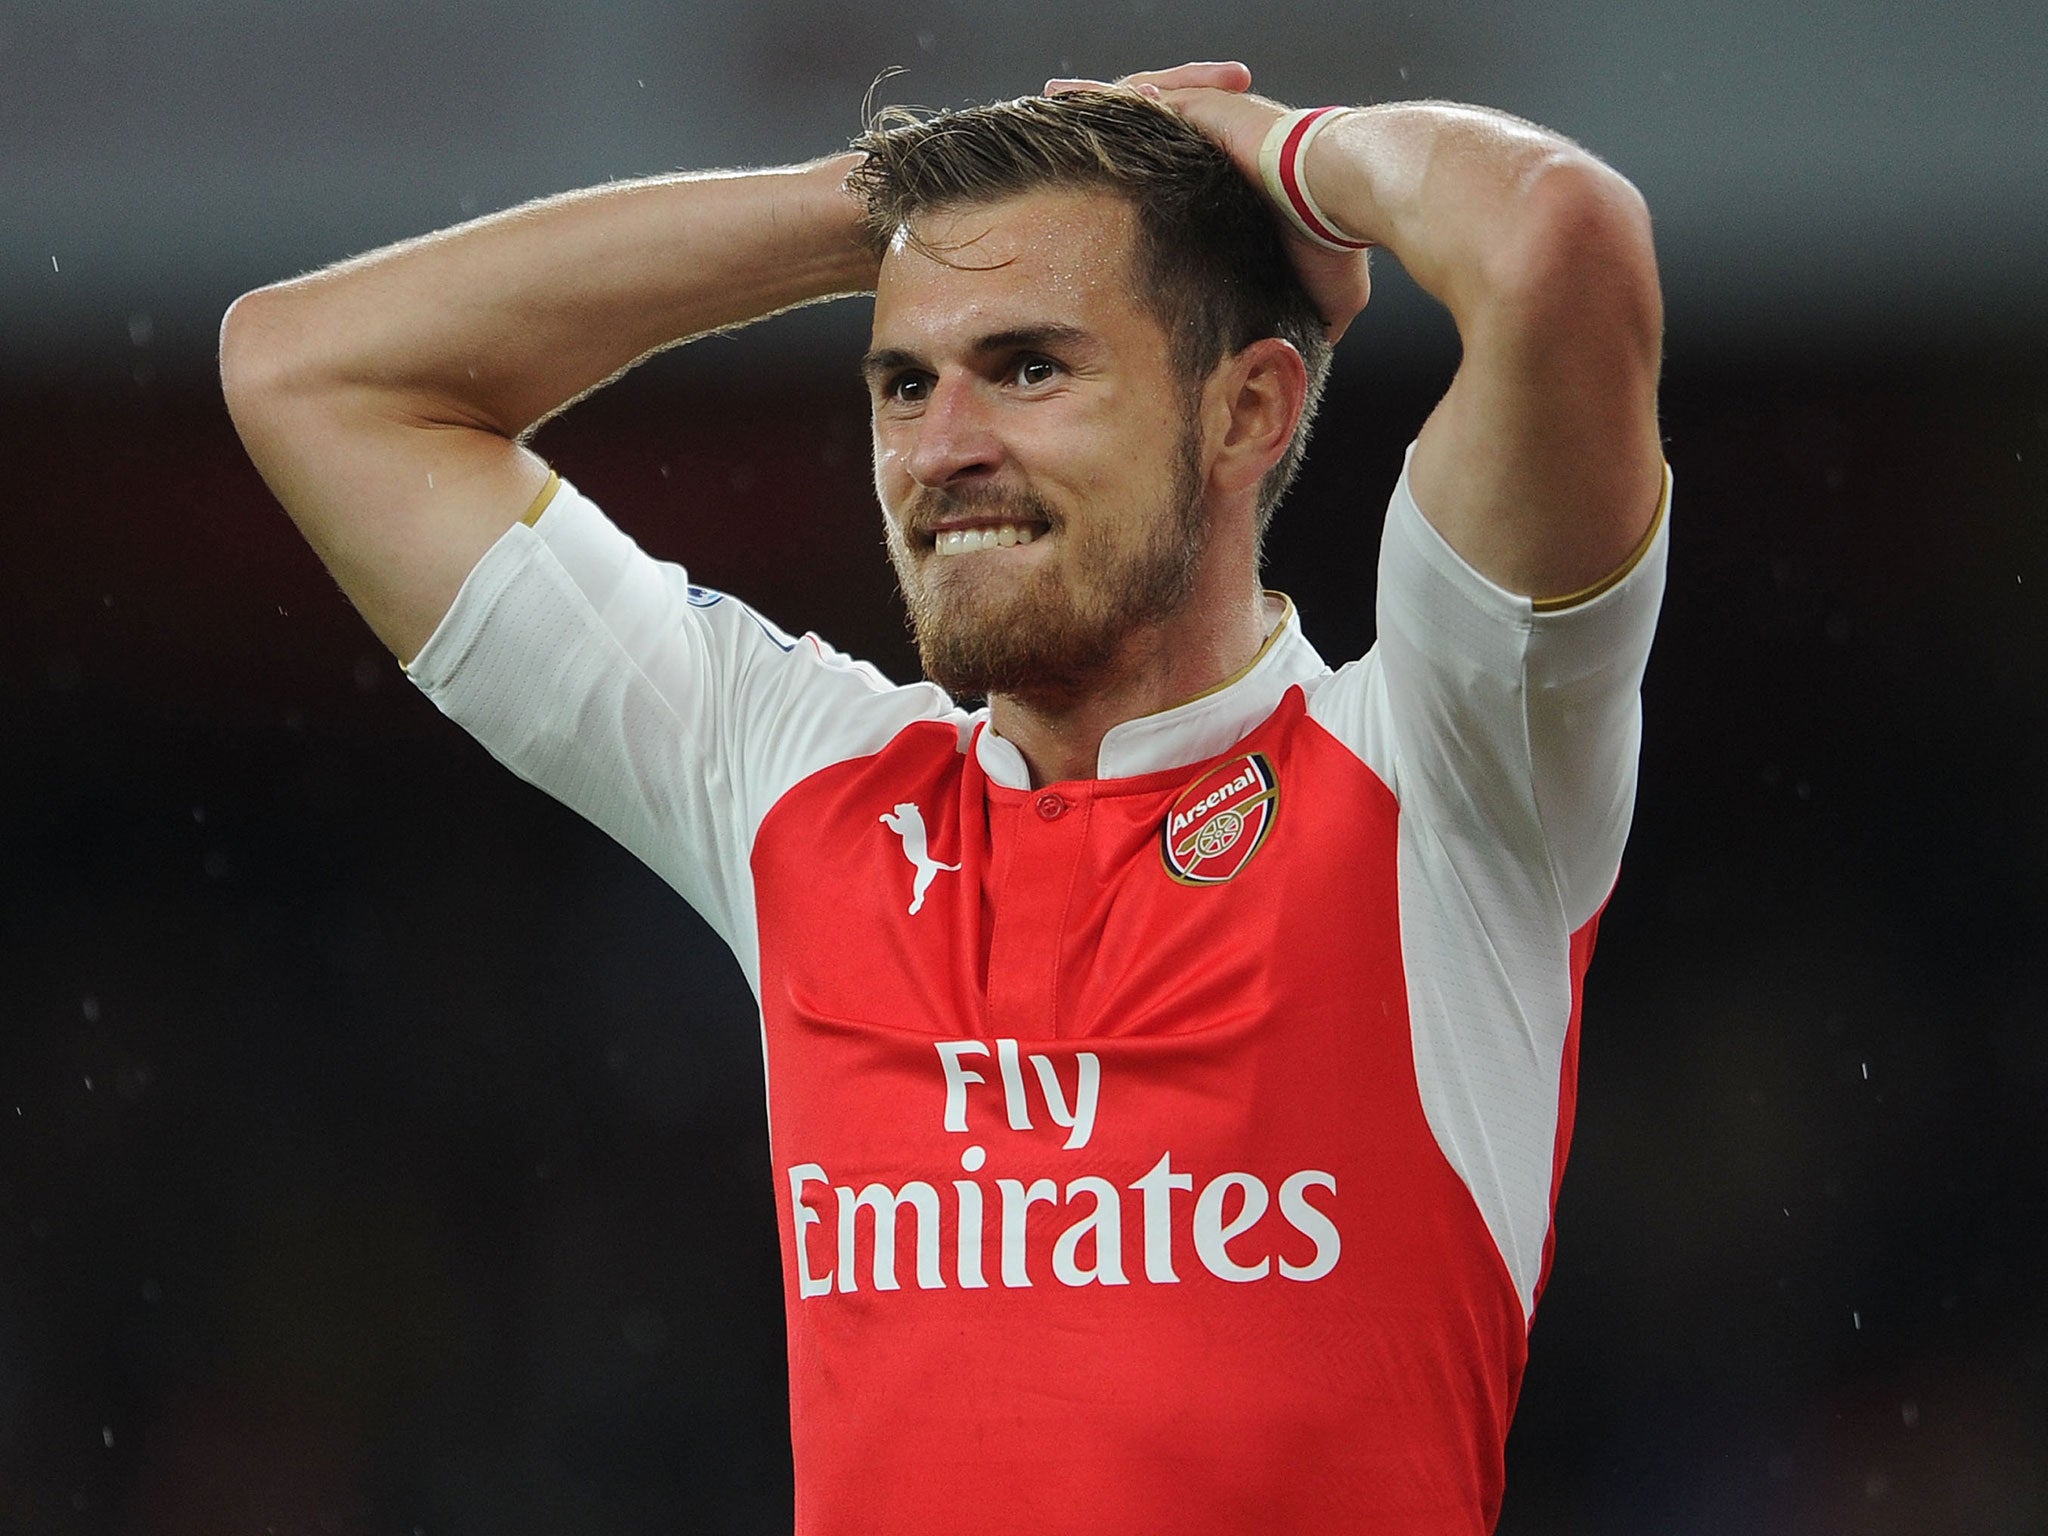 Arsenal midfielder Aaron Ramsey reacts after his goal is ruled out for offside